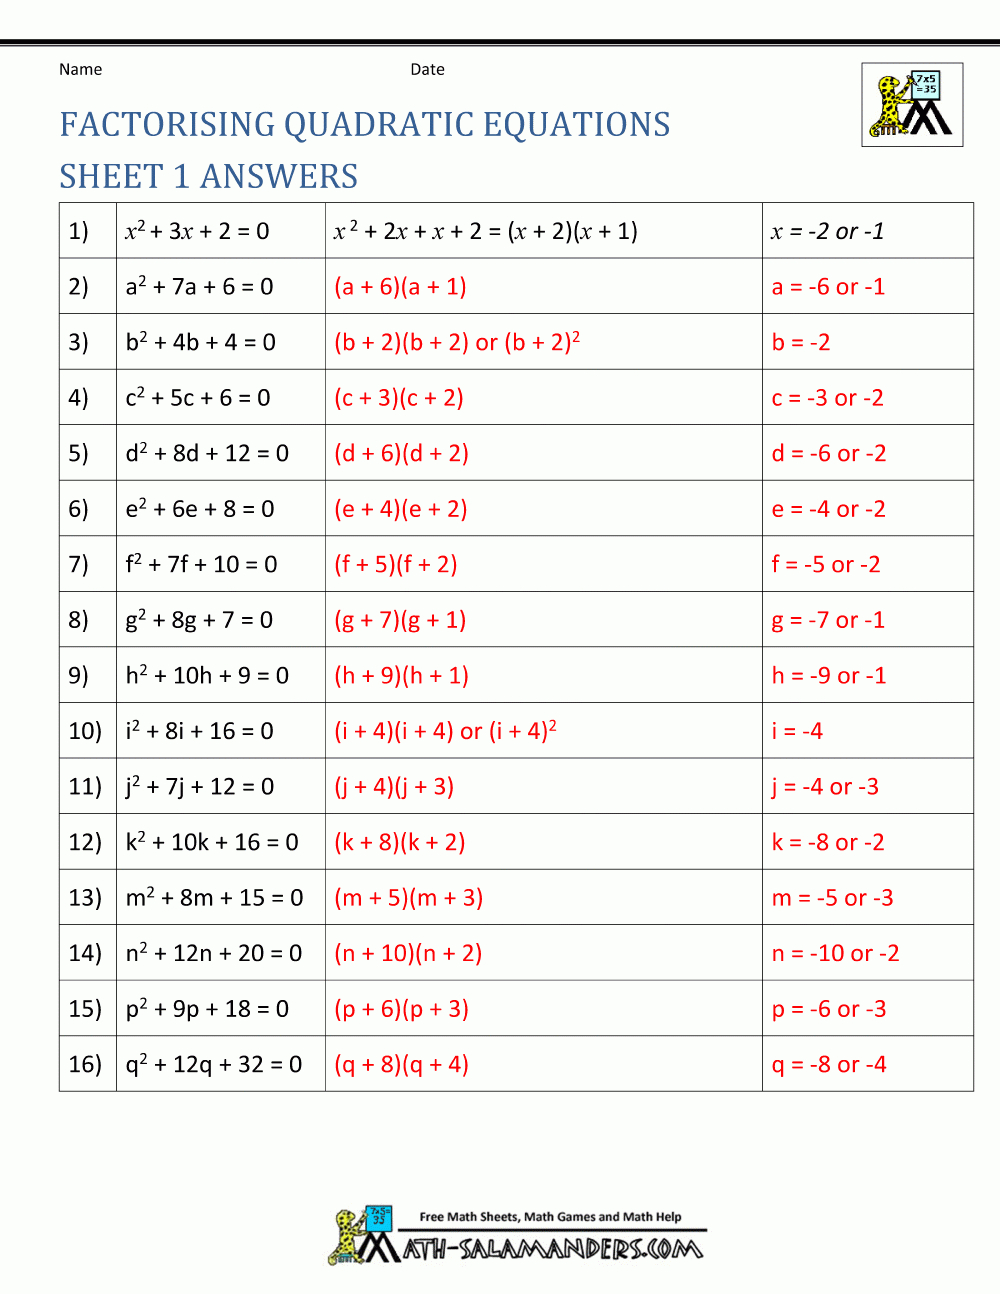 Factoring Quadratic Equations And Solving Polynomial Equations By Factoring Worksheet With Answers